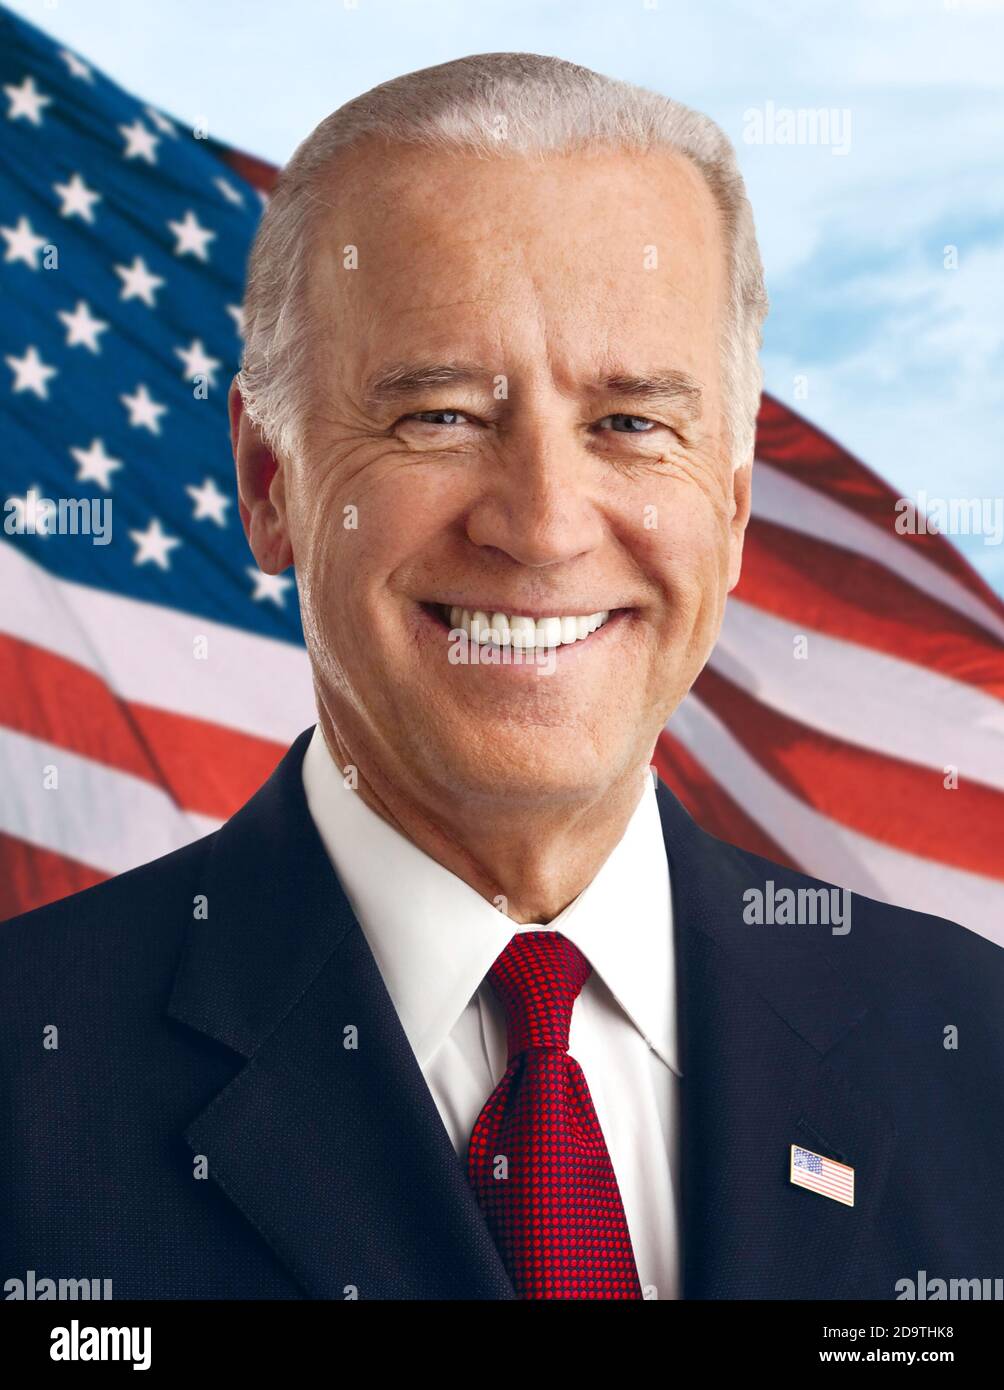 POTUS, The 46 th President of the United States, elected Joe Biden: Portrait shoot by Andrew 'Andy' Cutraro. Stock Photo